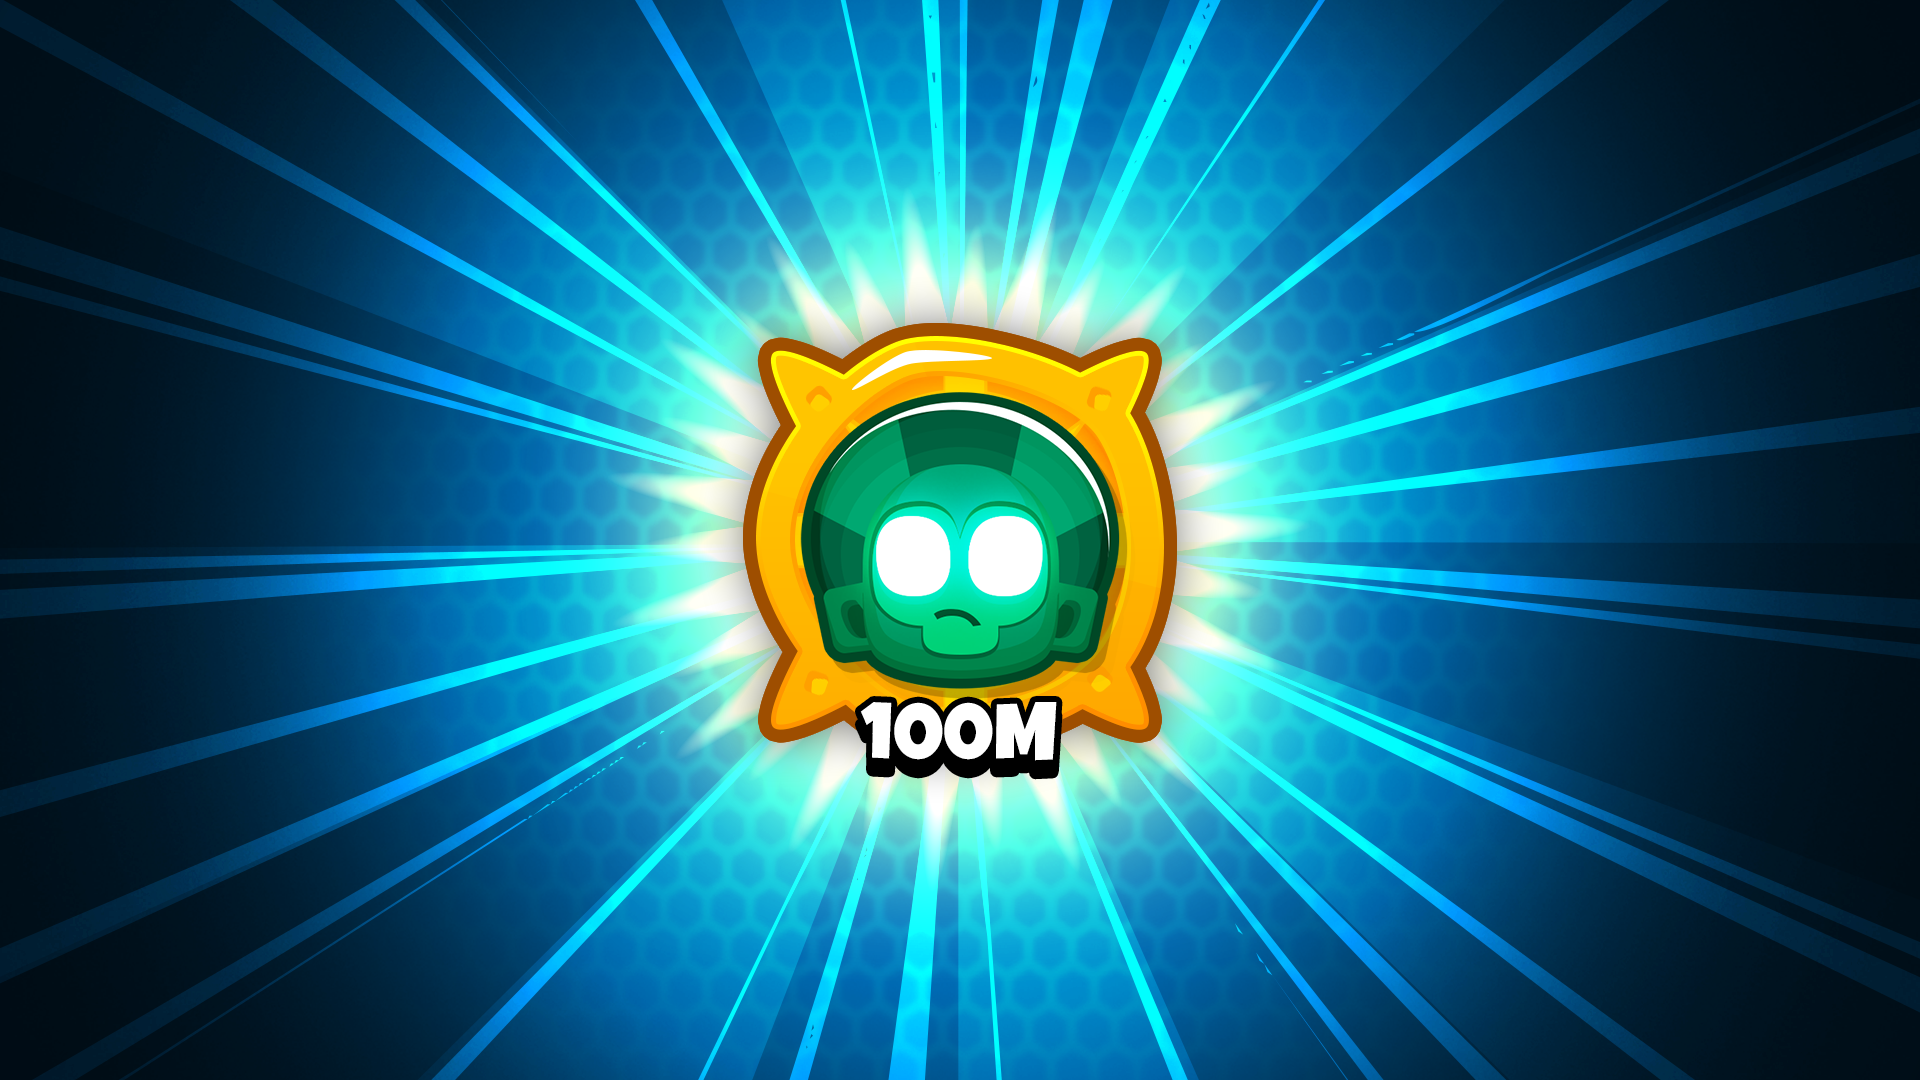 Icon for Impoppable